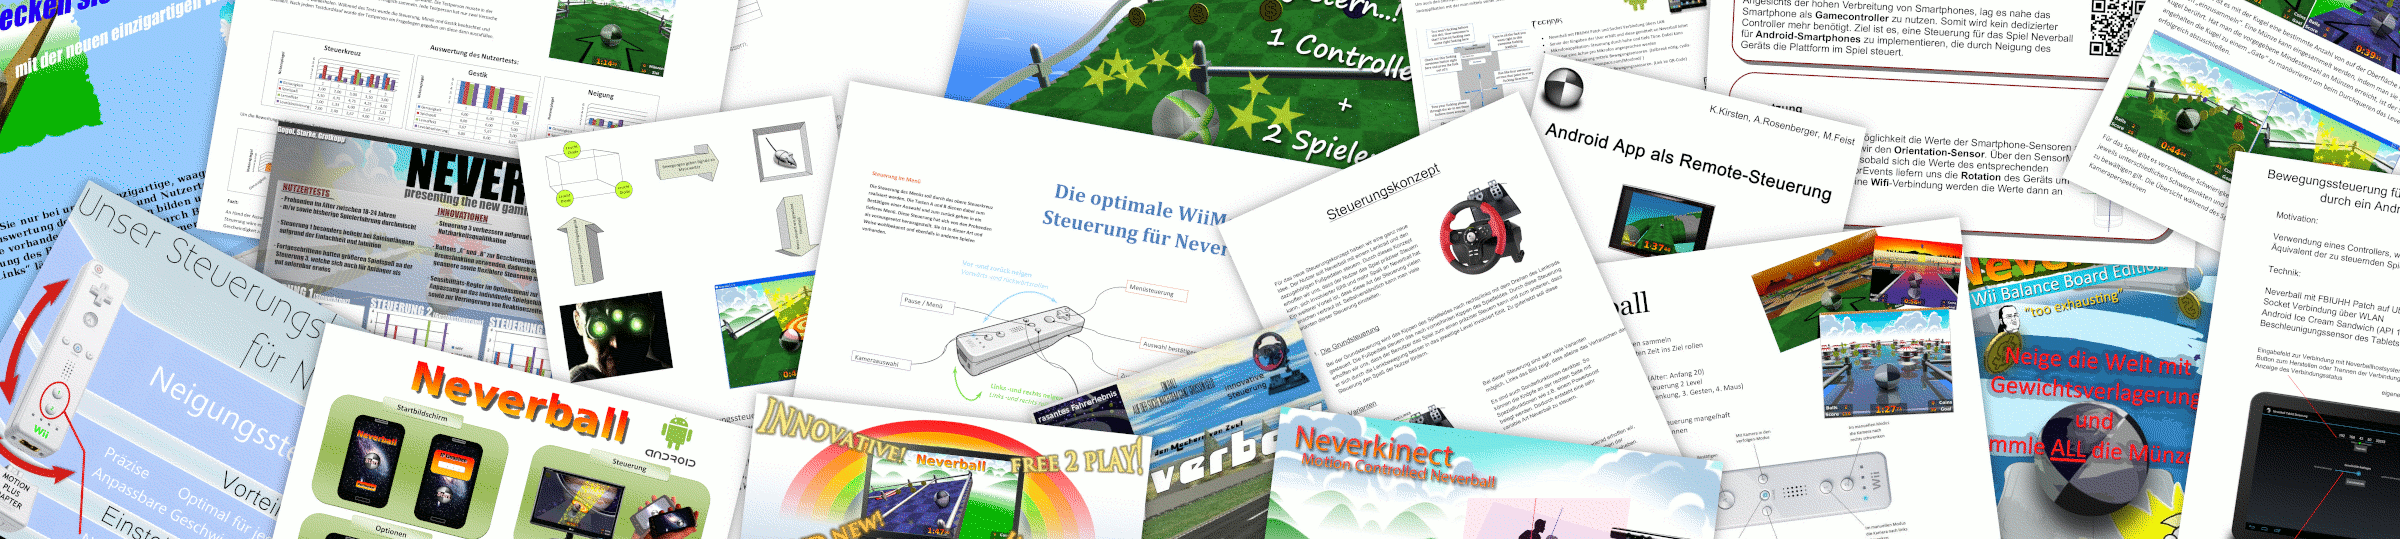 Collage of Neverball interaction posters